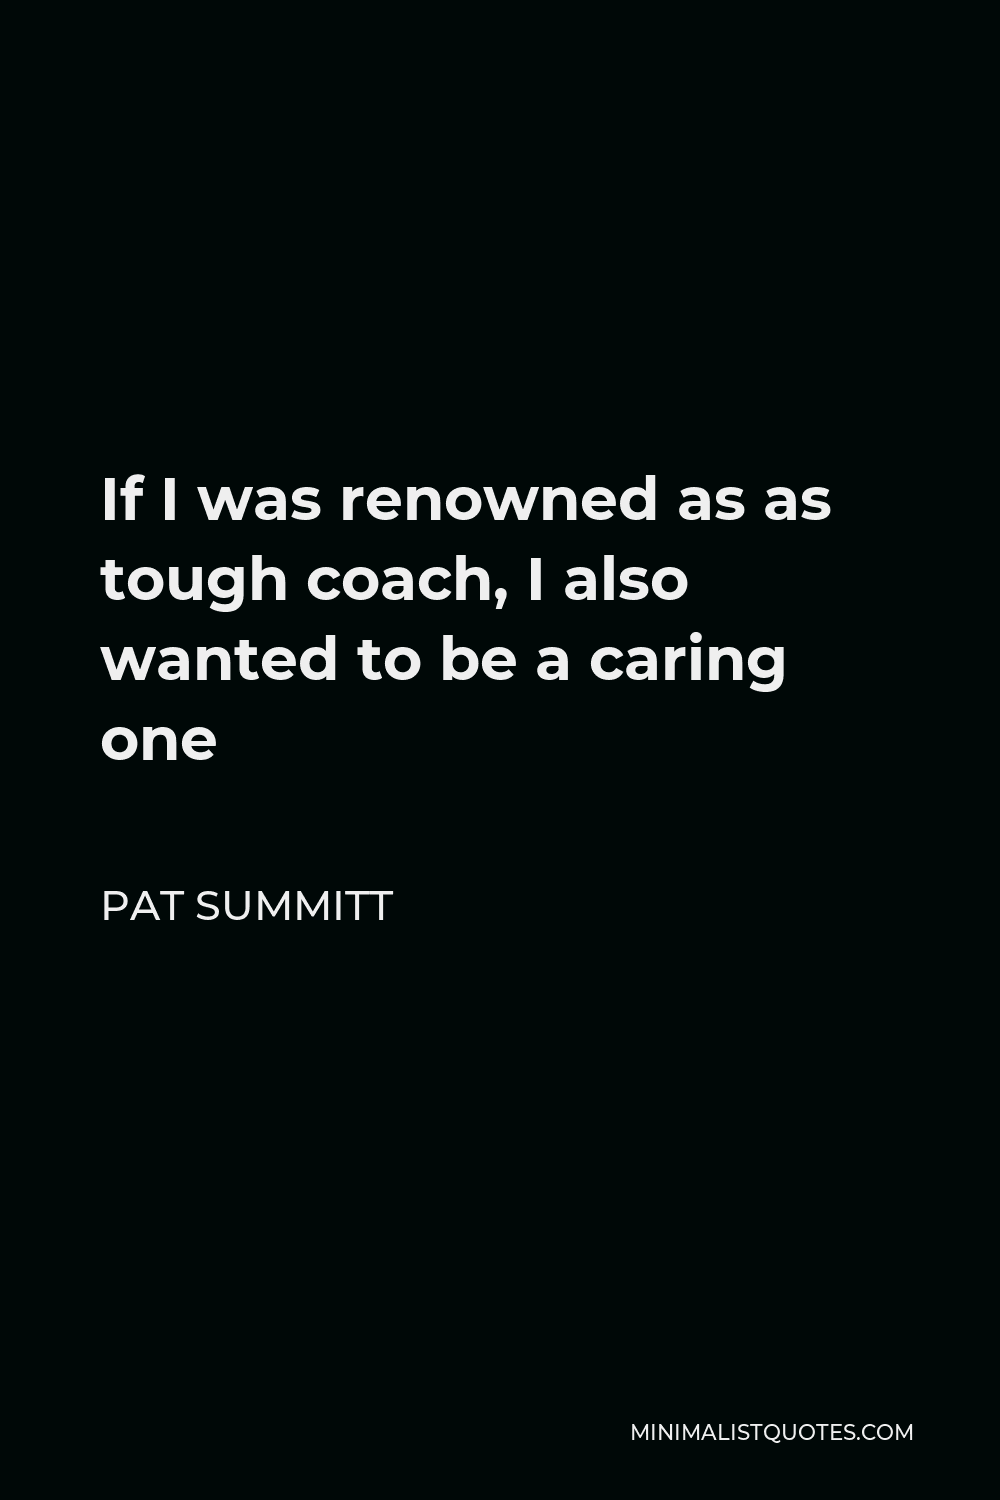 Pat Summitt Quote - If I was renowned as as tough coach, I also wanted to be a caring one